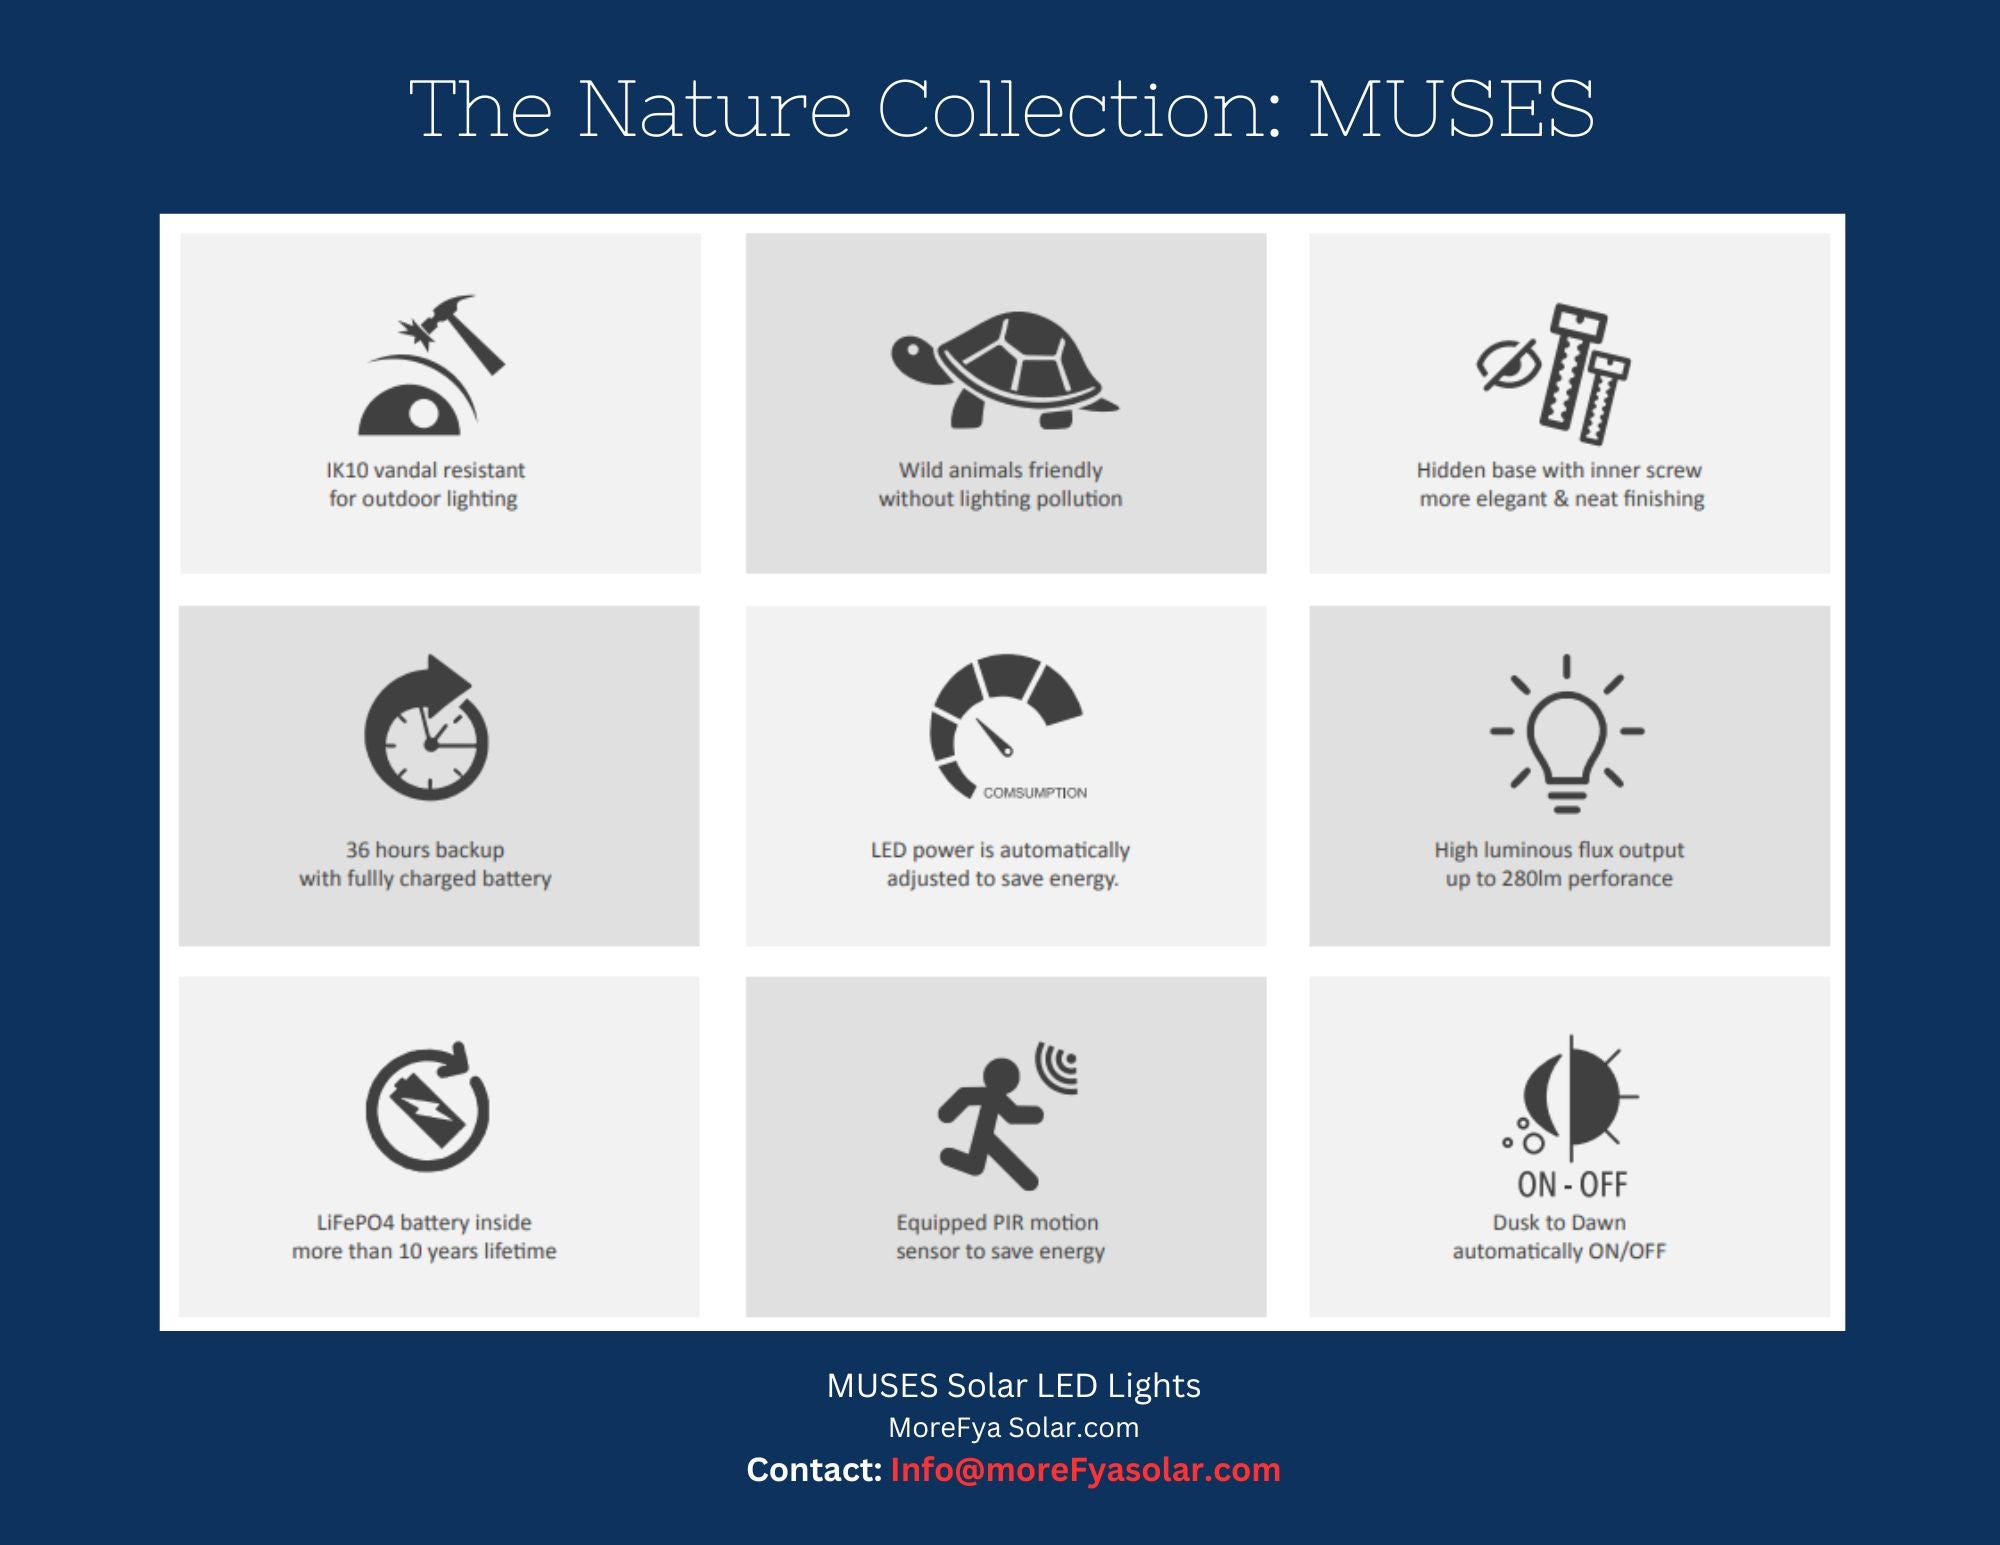 The Nature Collection: MUSES Solar Bollard and Wall Mount LED Light